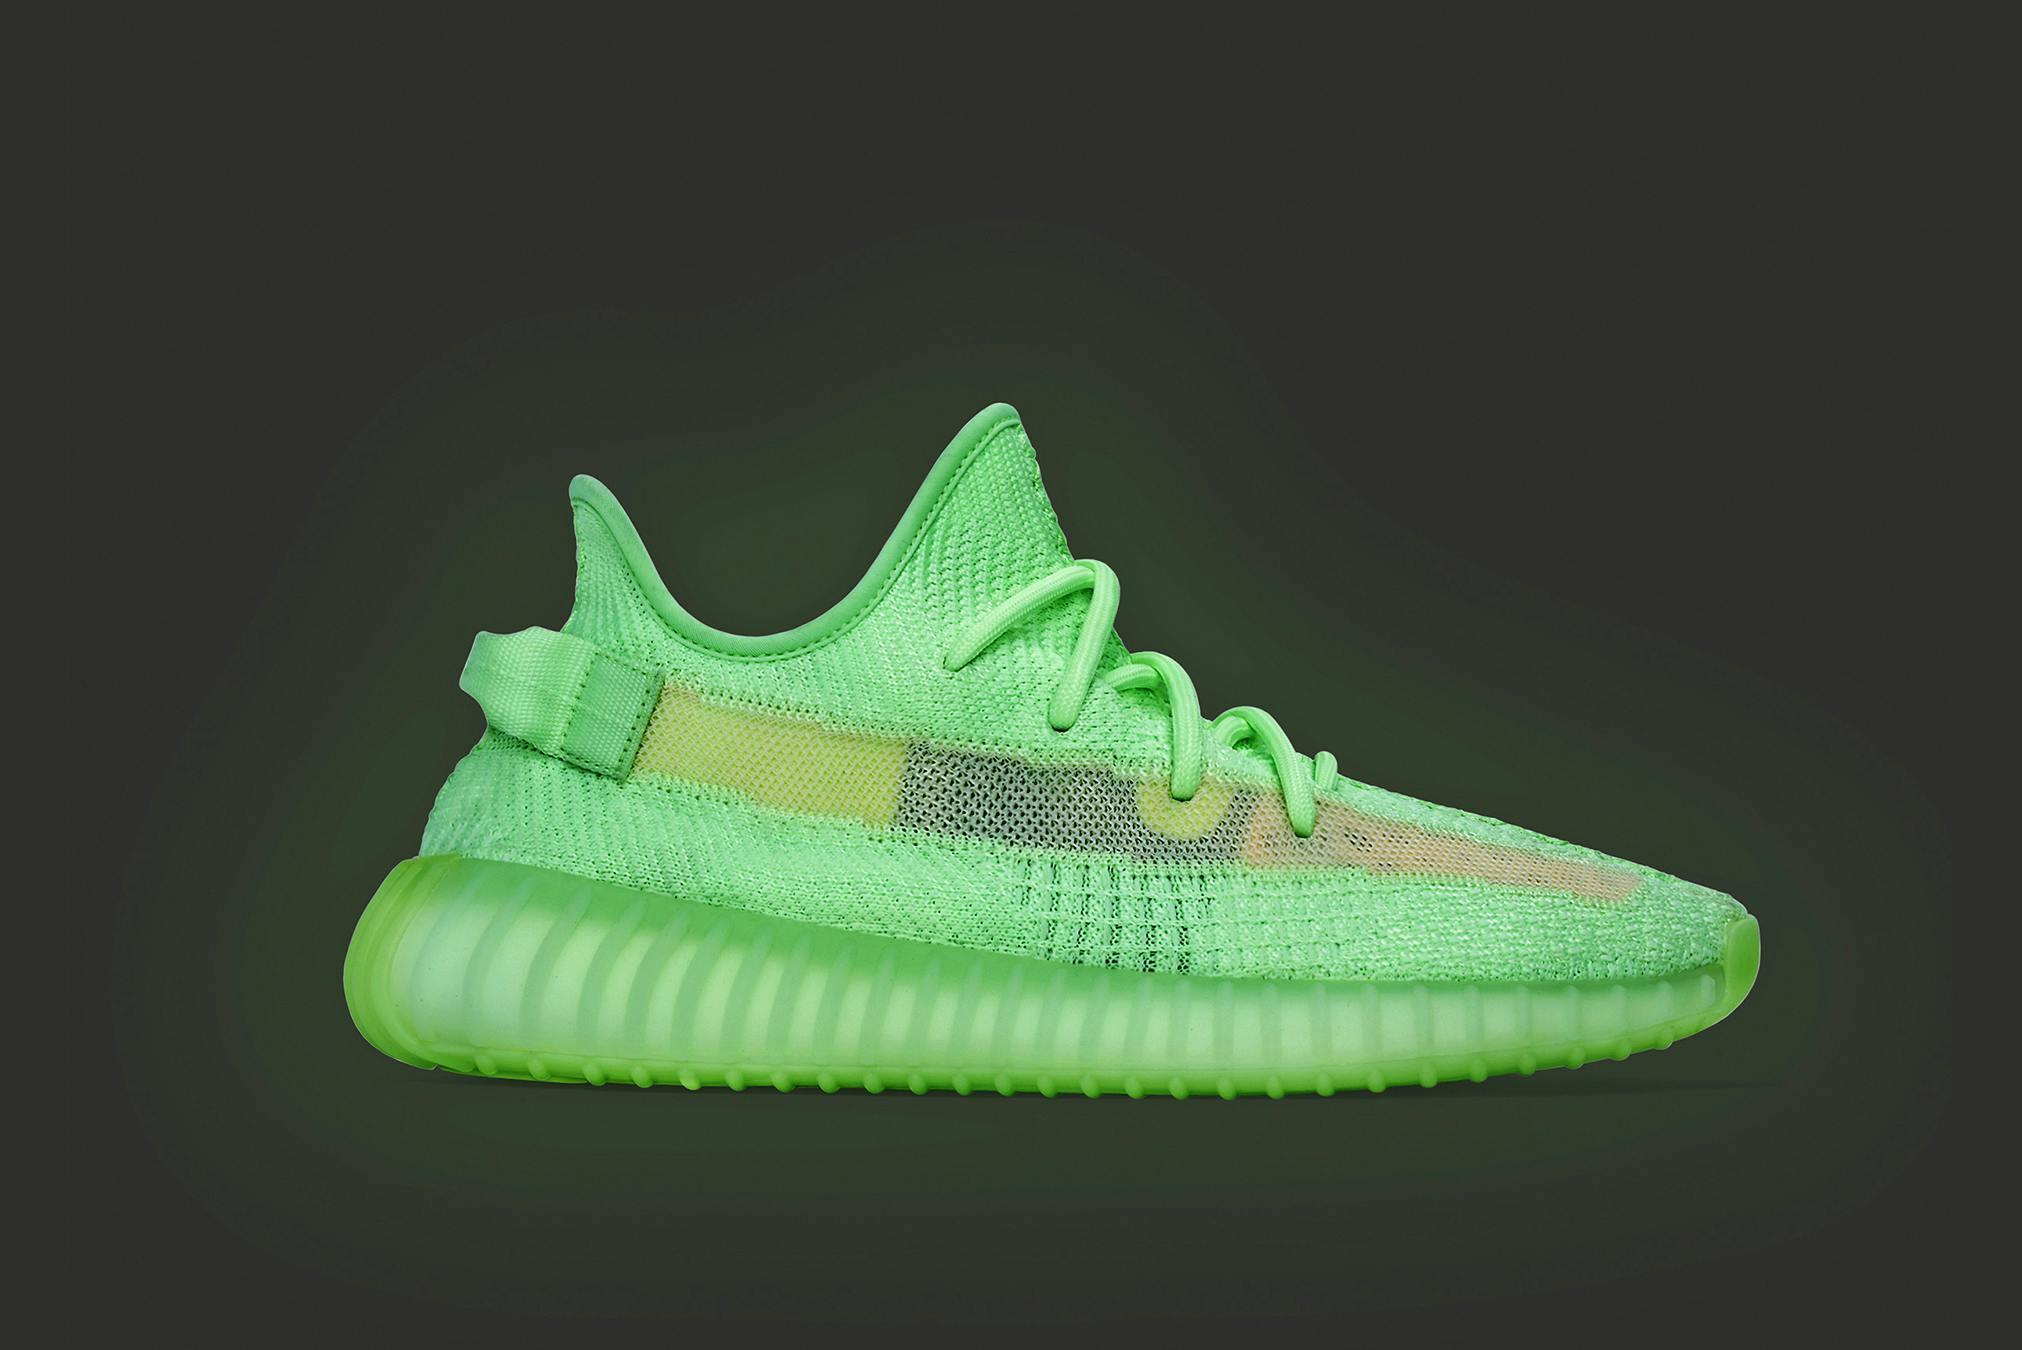 YEEZY Boost 350v2 'Glow' - Register Now on END. Launches | END.